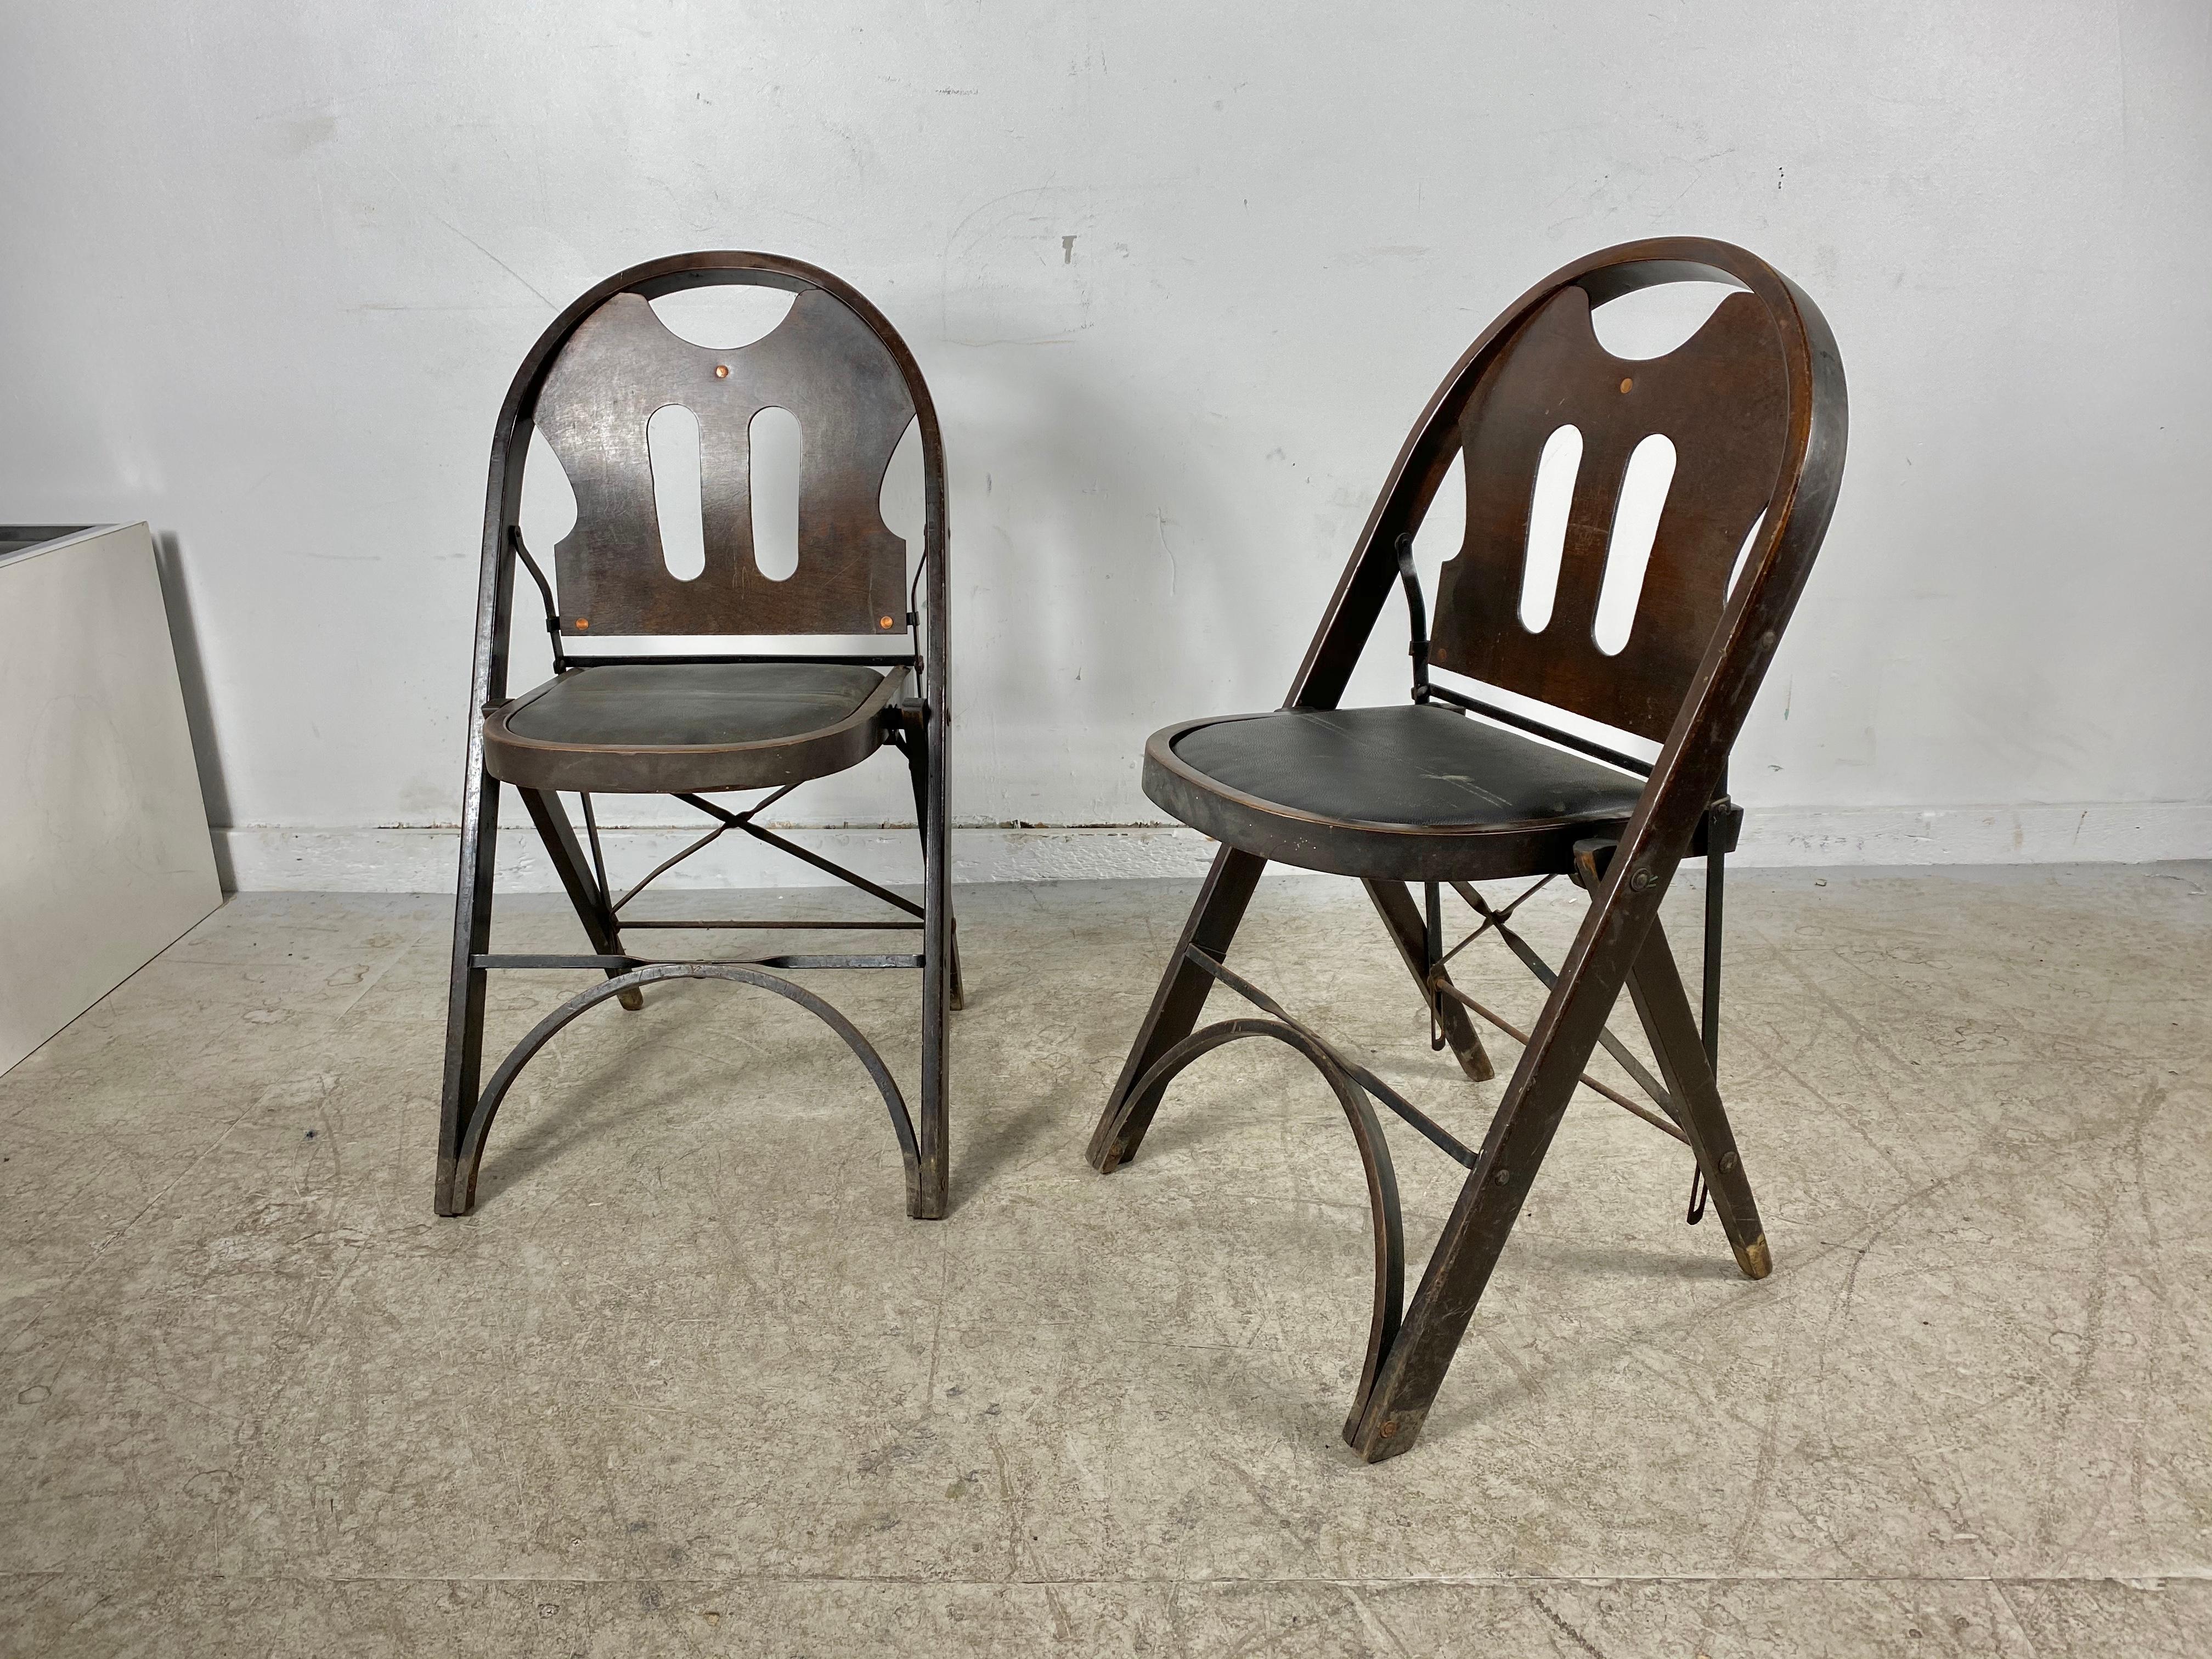 American Louis Rostetter & Sons Turn of the Century Industrial Folding Chairs, SFMOMA